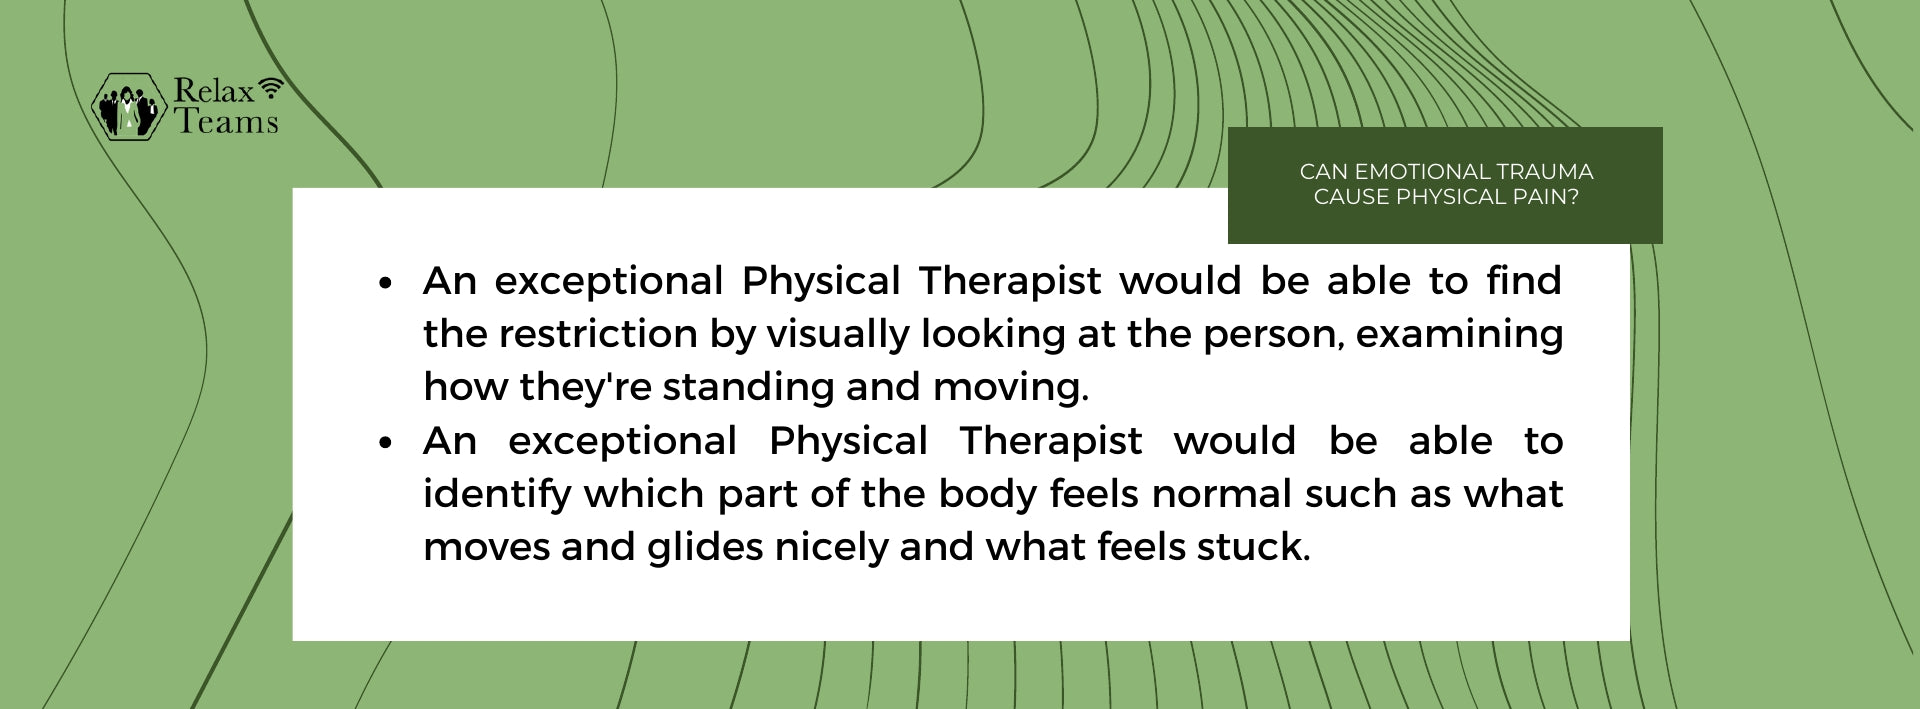 An exceptional Physical Therapist would be able to find the restriction by visually looking at the person, examining how they're standing and moving.